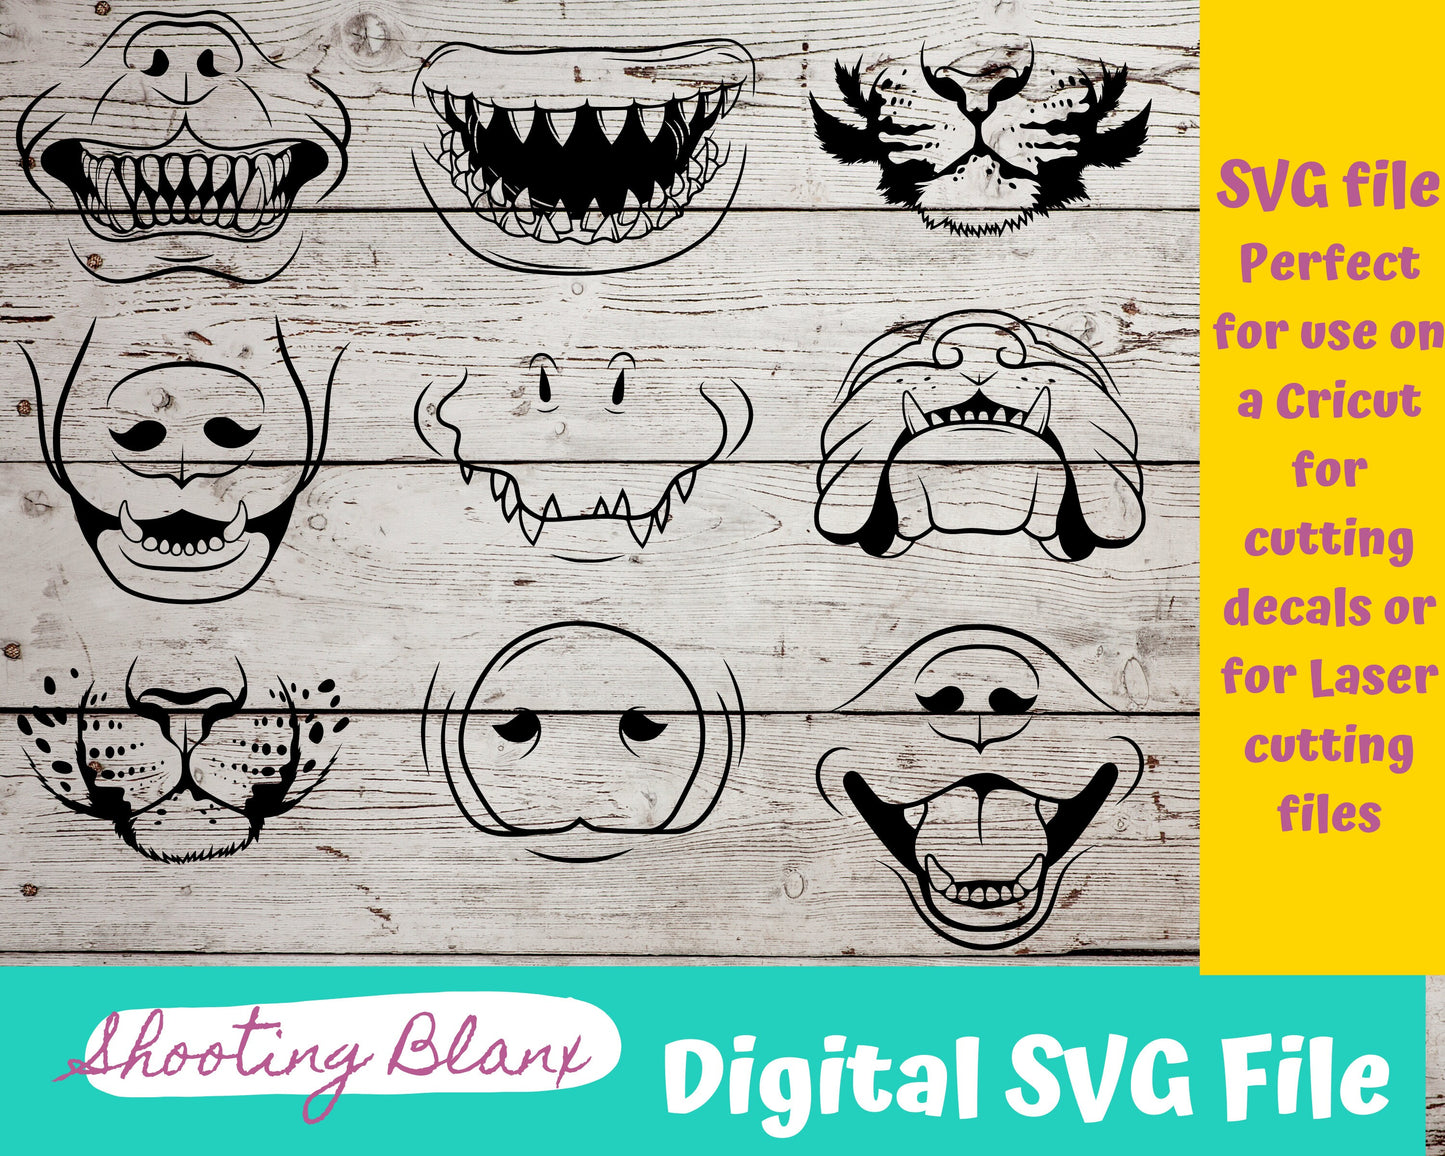 Animal Mouth bundle SVG files perfect for Cricut, Cameo, or Silhouette also for laser engraving Glowforge, half face, mask, sublimation